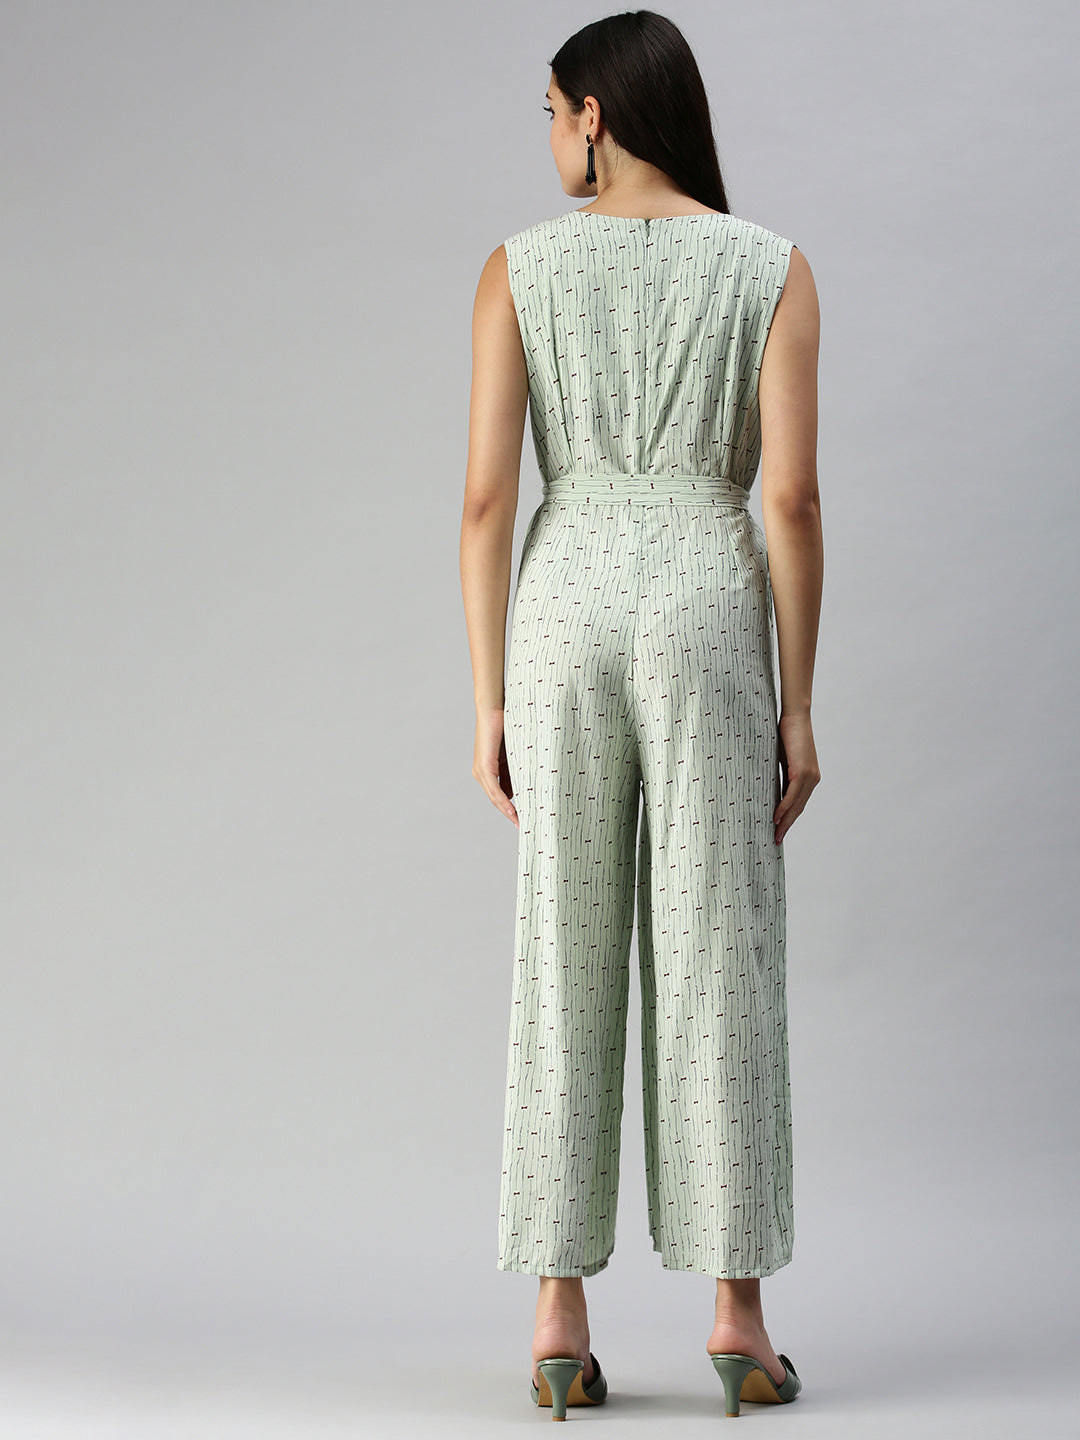 Women's Green Printed Jumpsuits